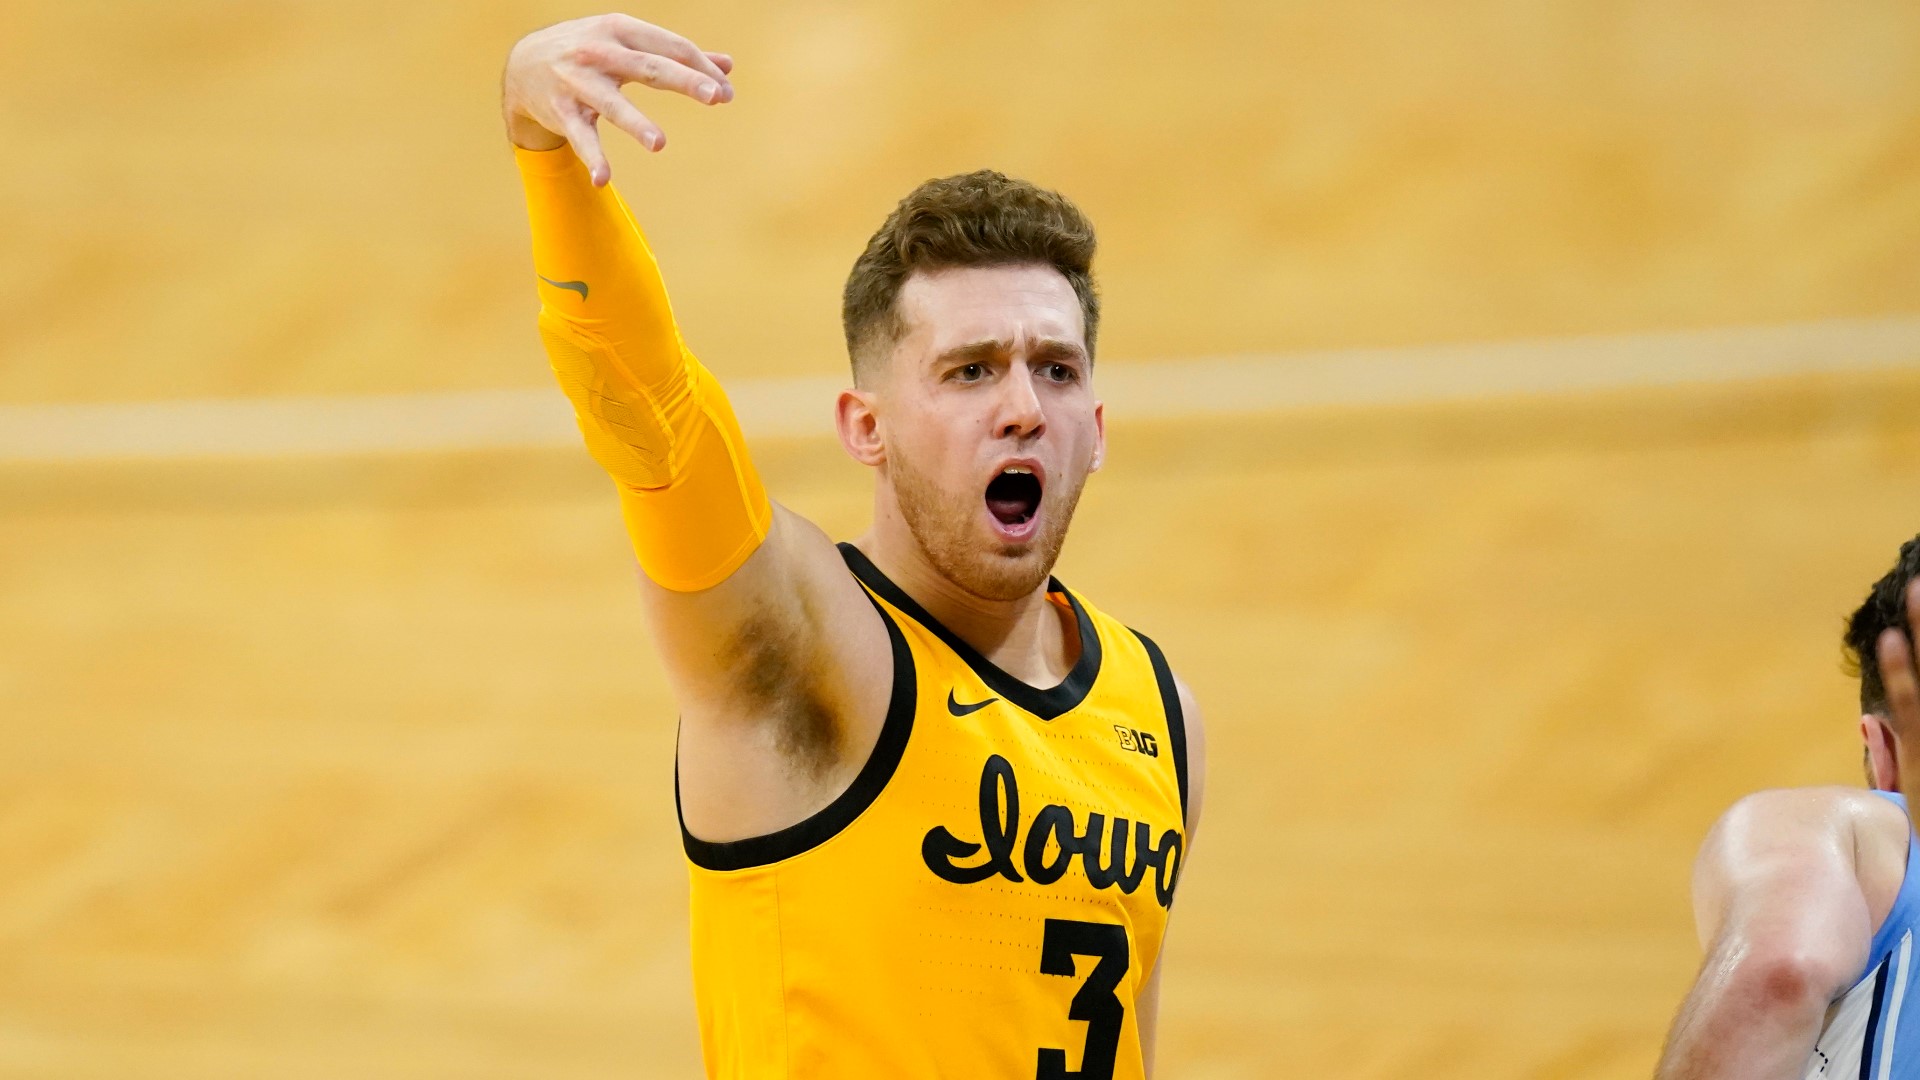 The Hawkeyes are now 4-0 on the season.